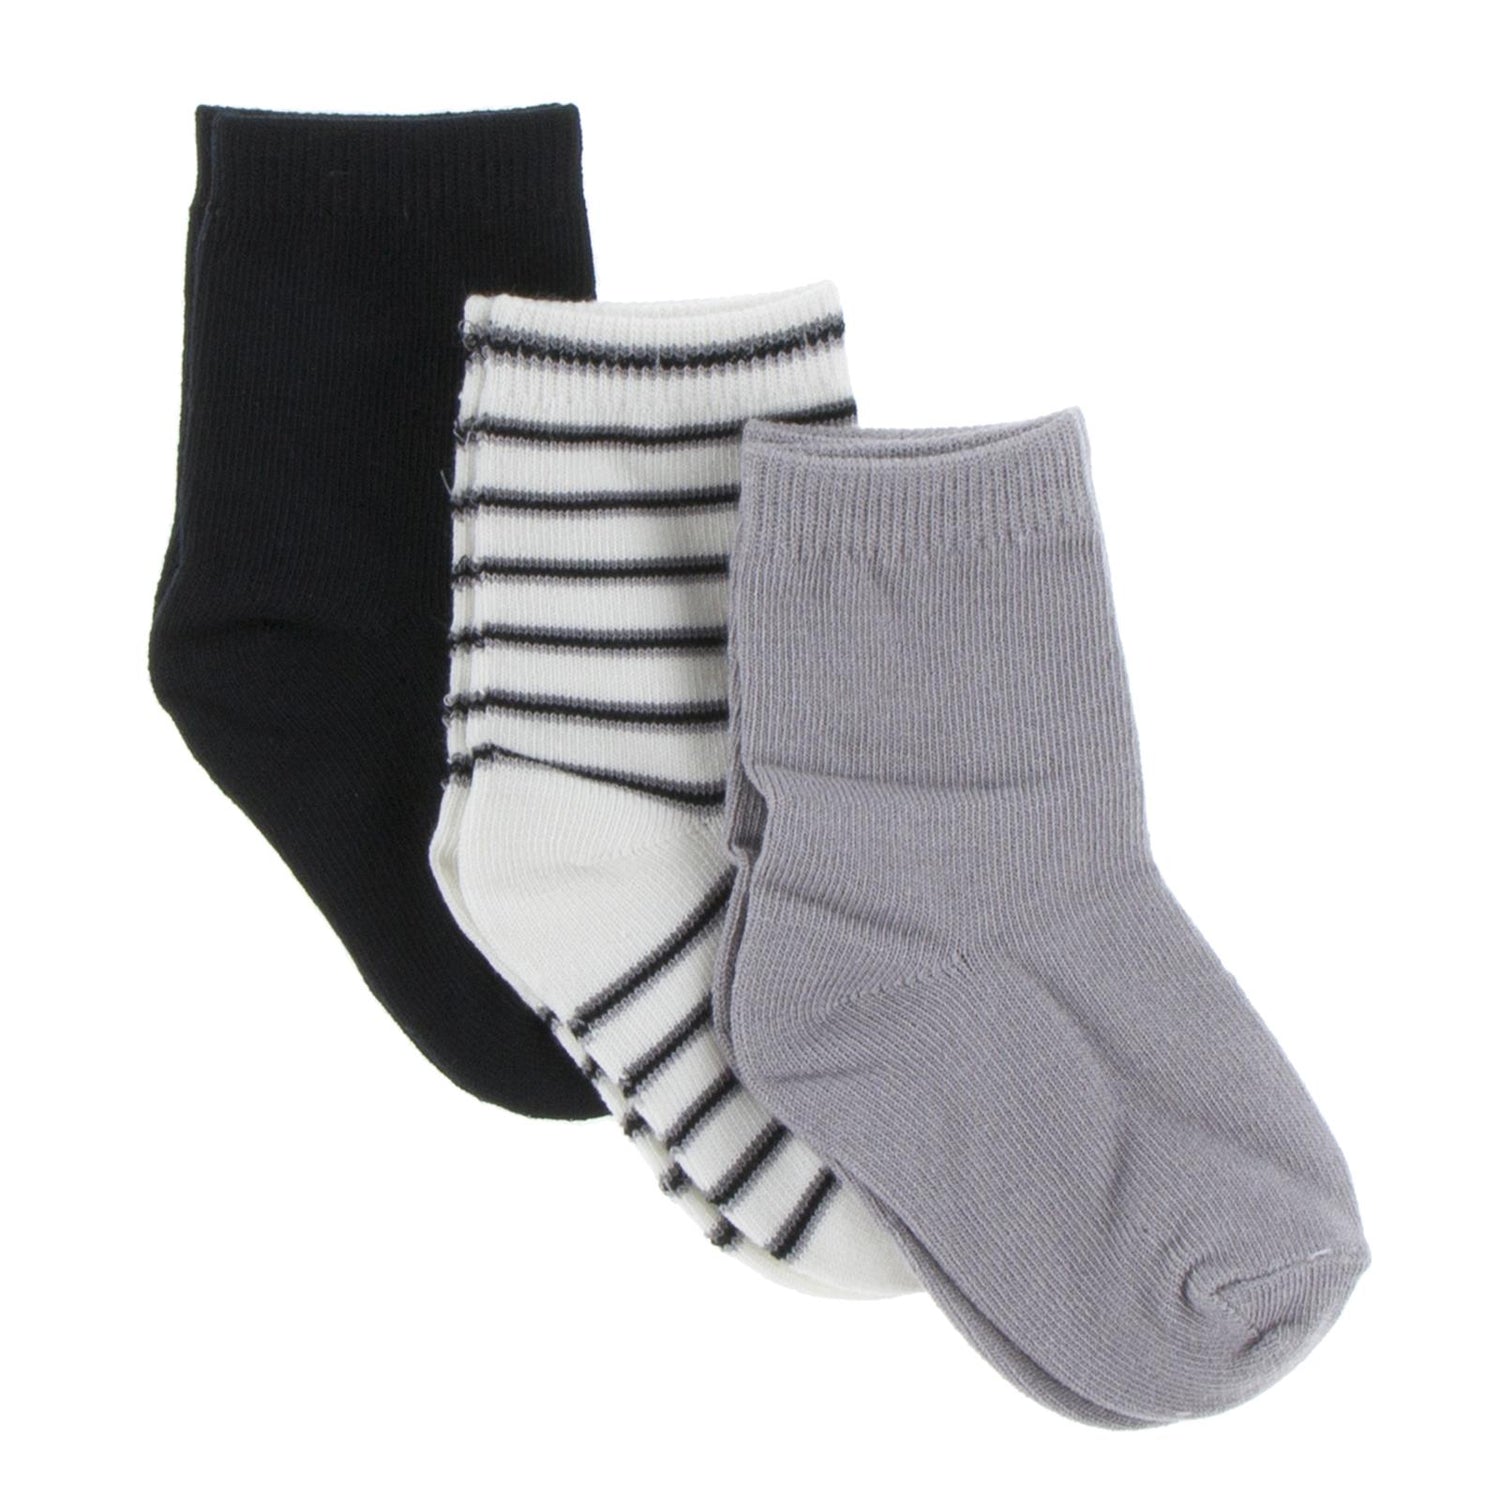 Sock Set in Midnight, Neutral Parisian Stripe and Feather